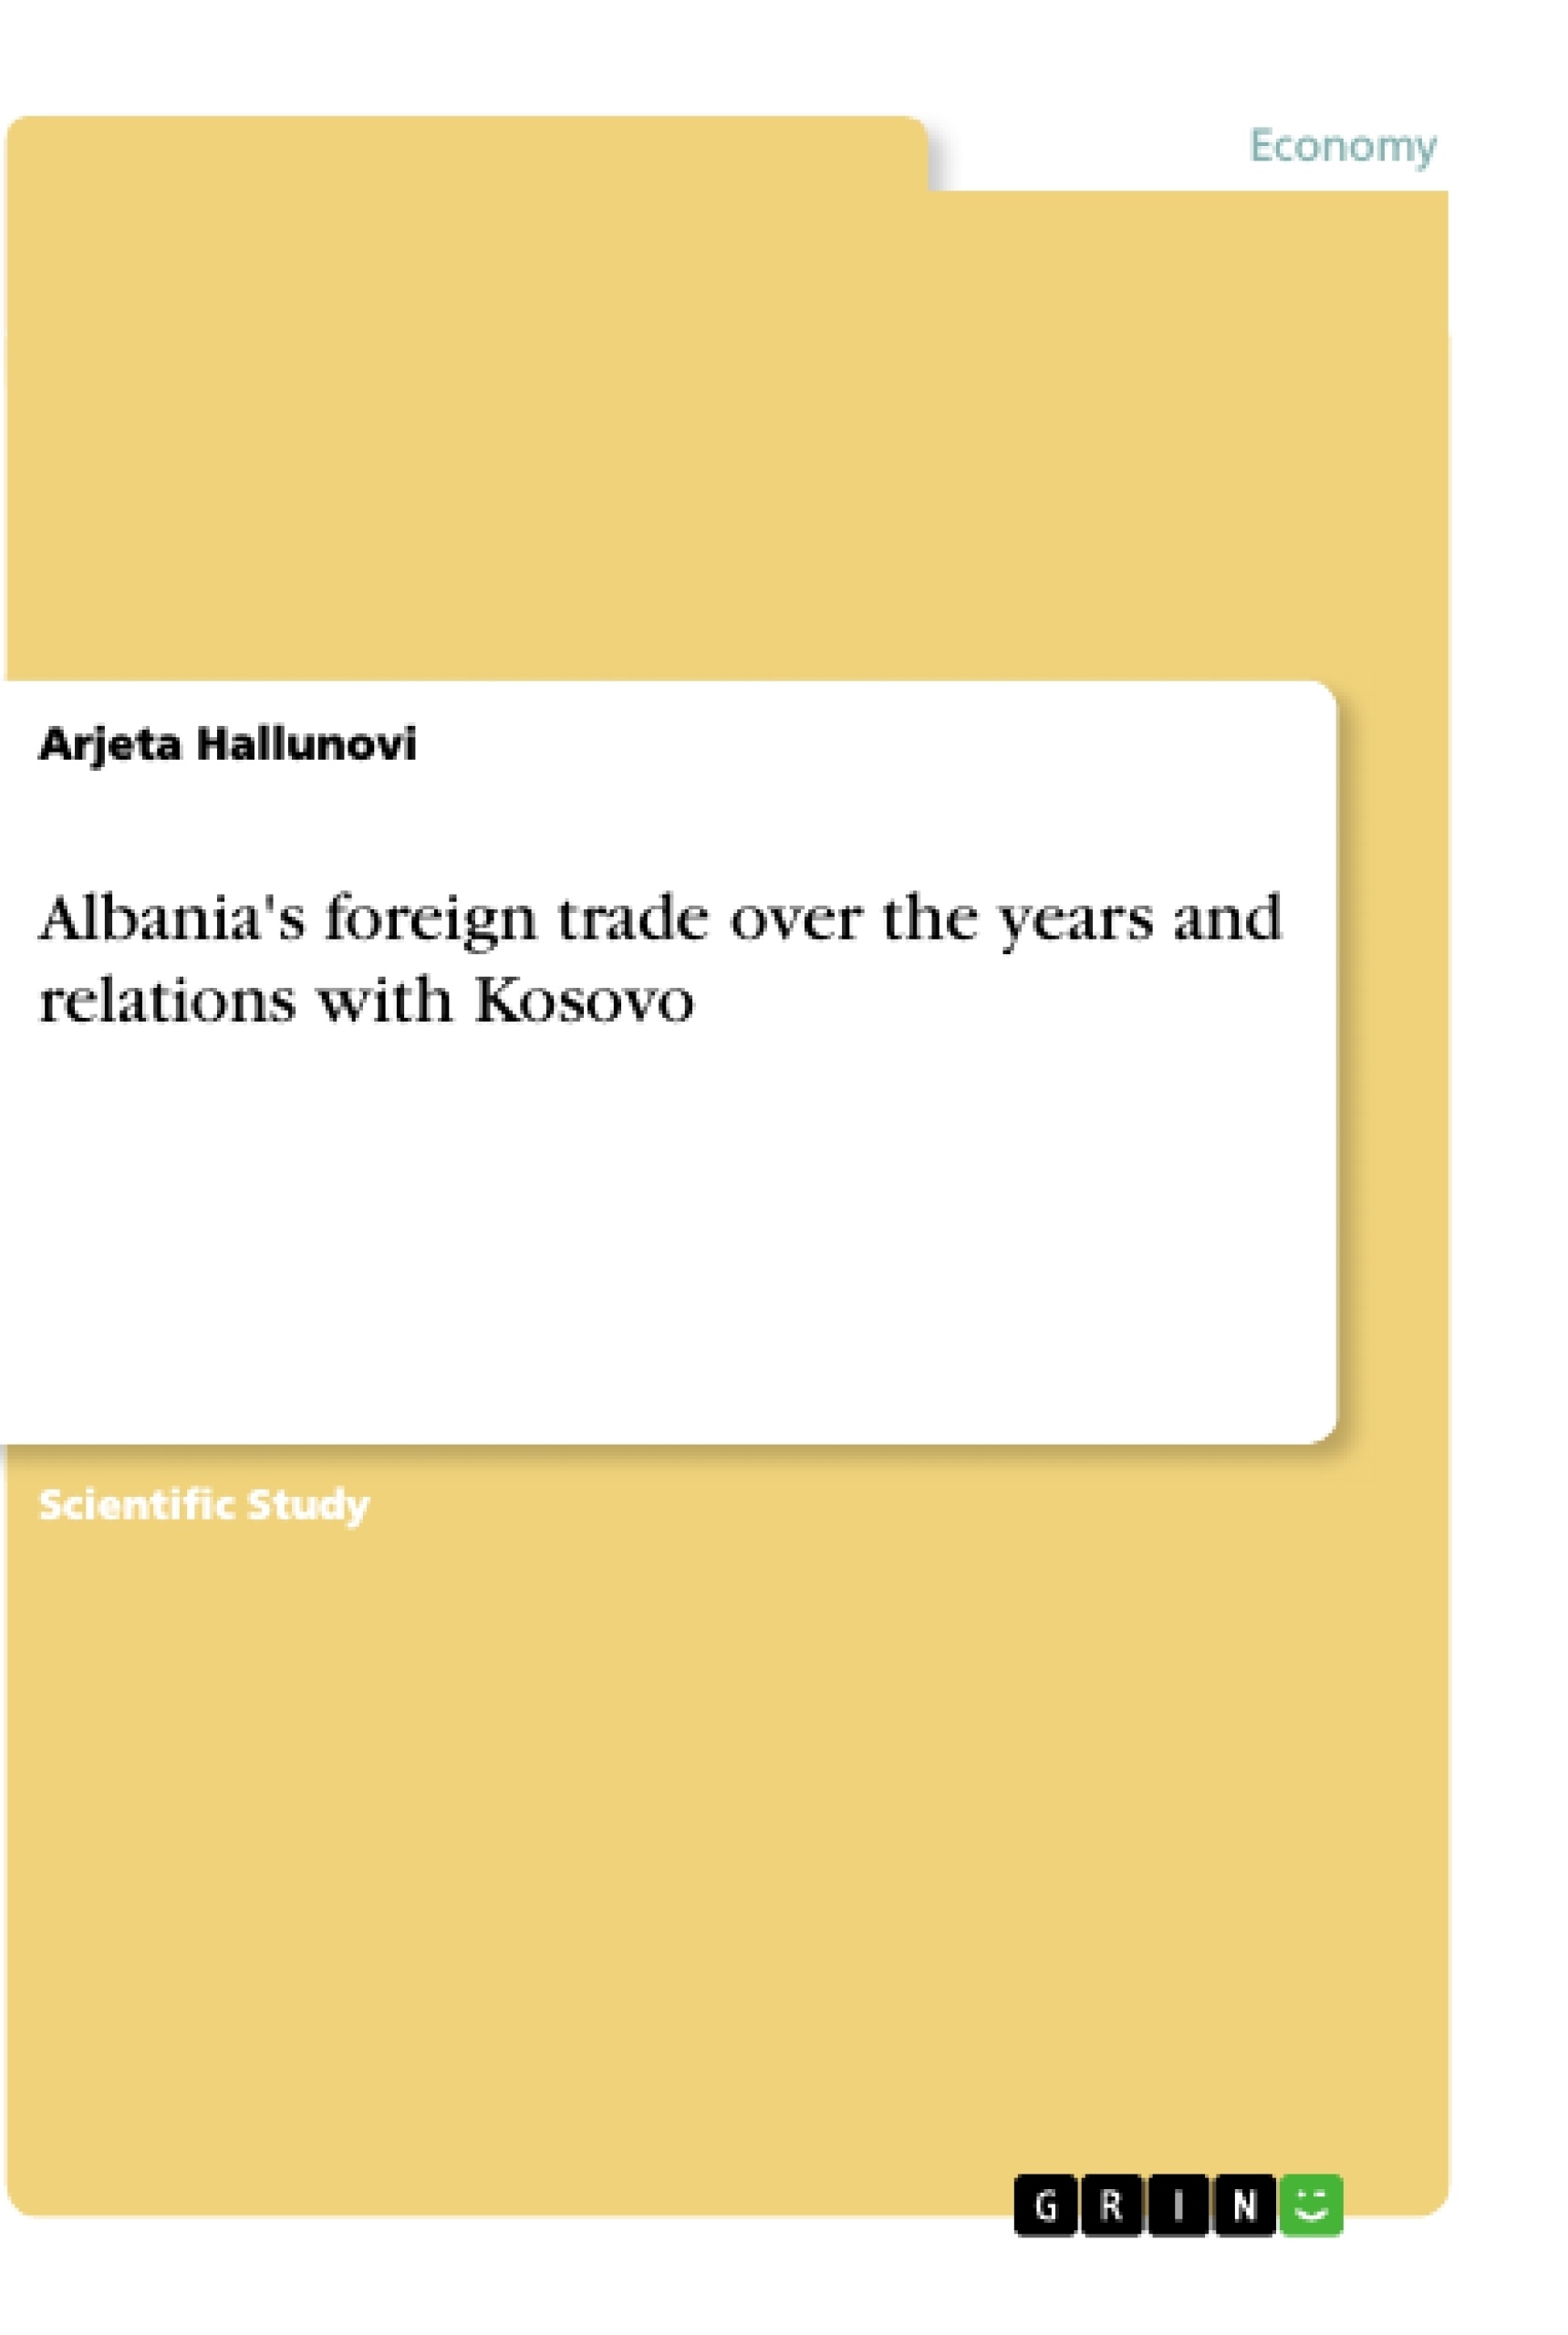 Title: Albania's foreign trade over the years and relations with Kosovo